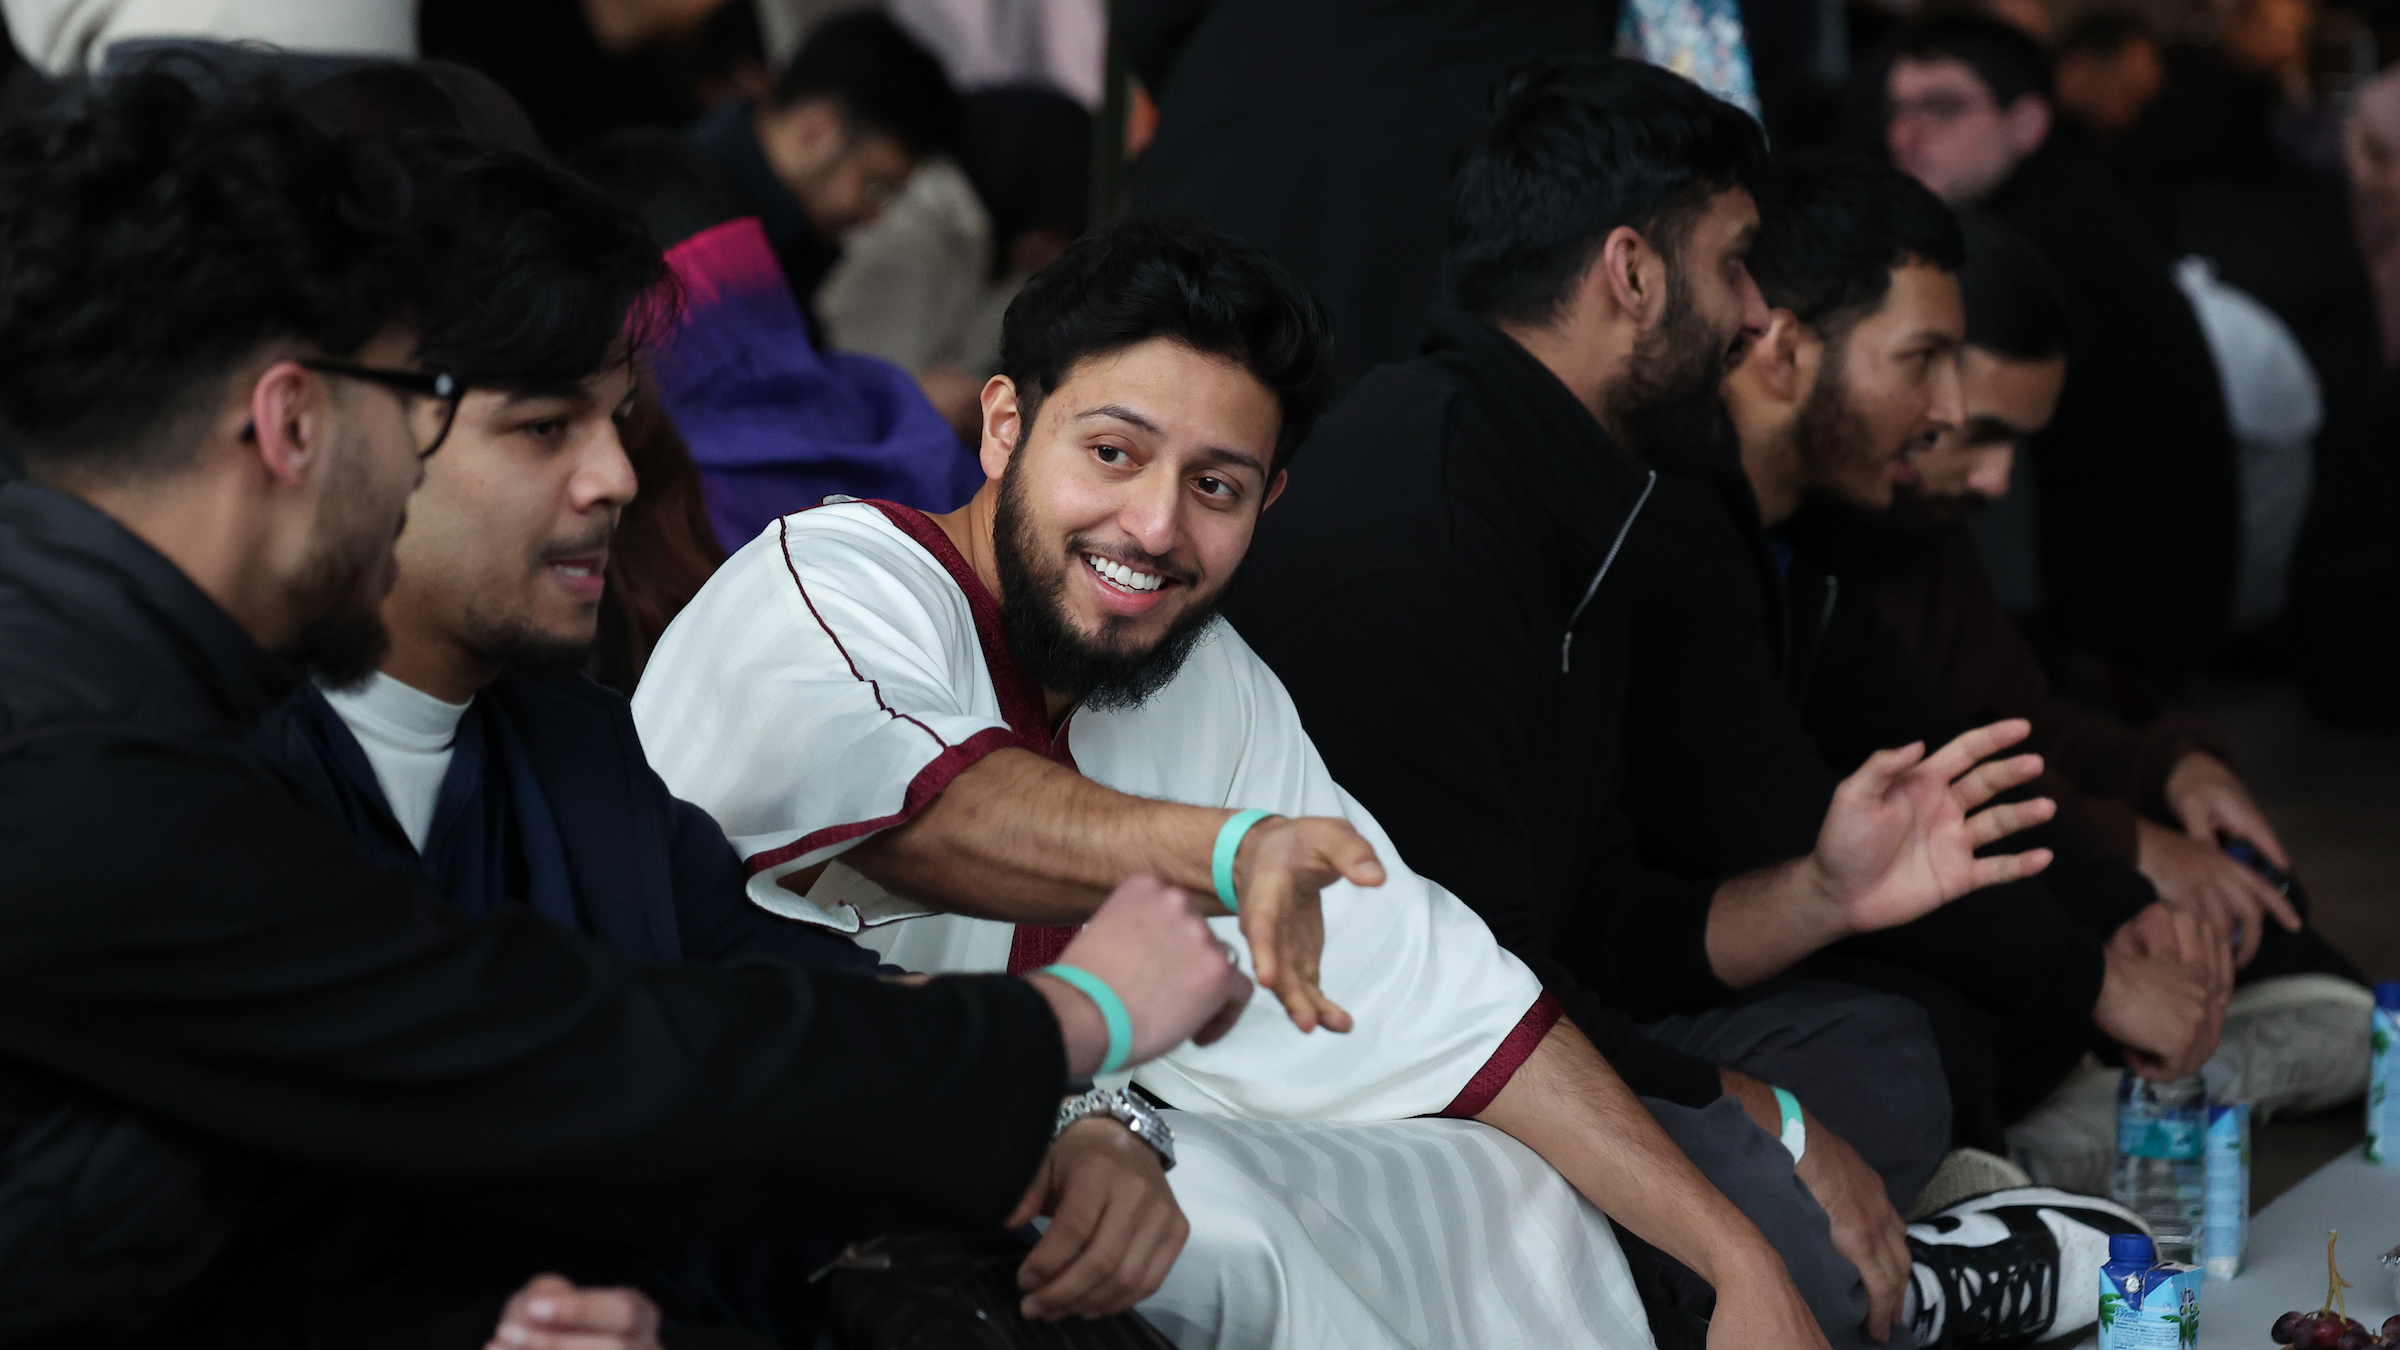 Hundreds attend Iftar meal at the Amex